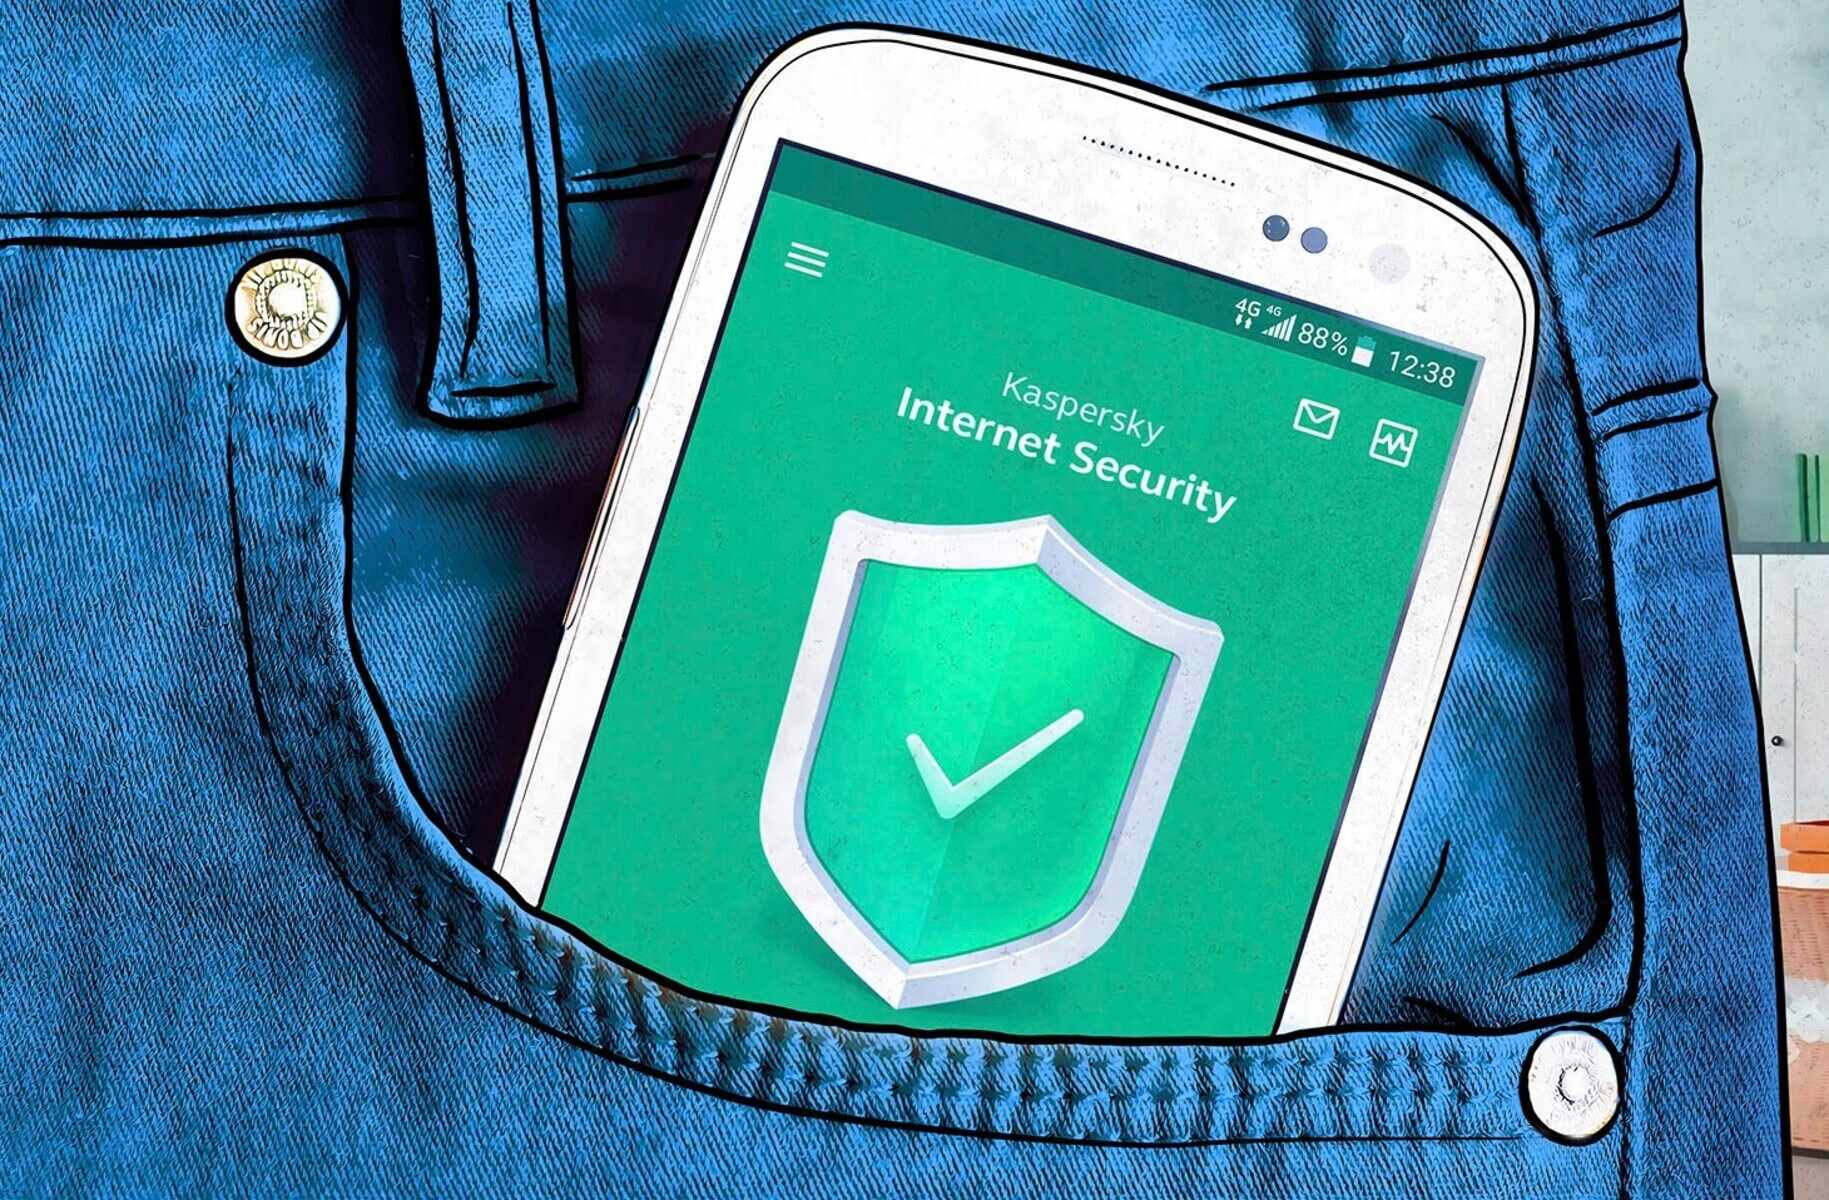 How To Use Kaspersky Internet Security For My Phone